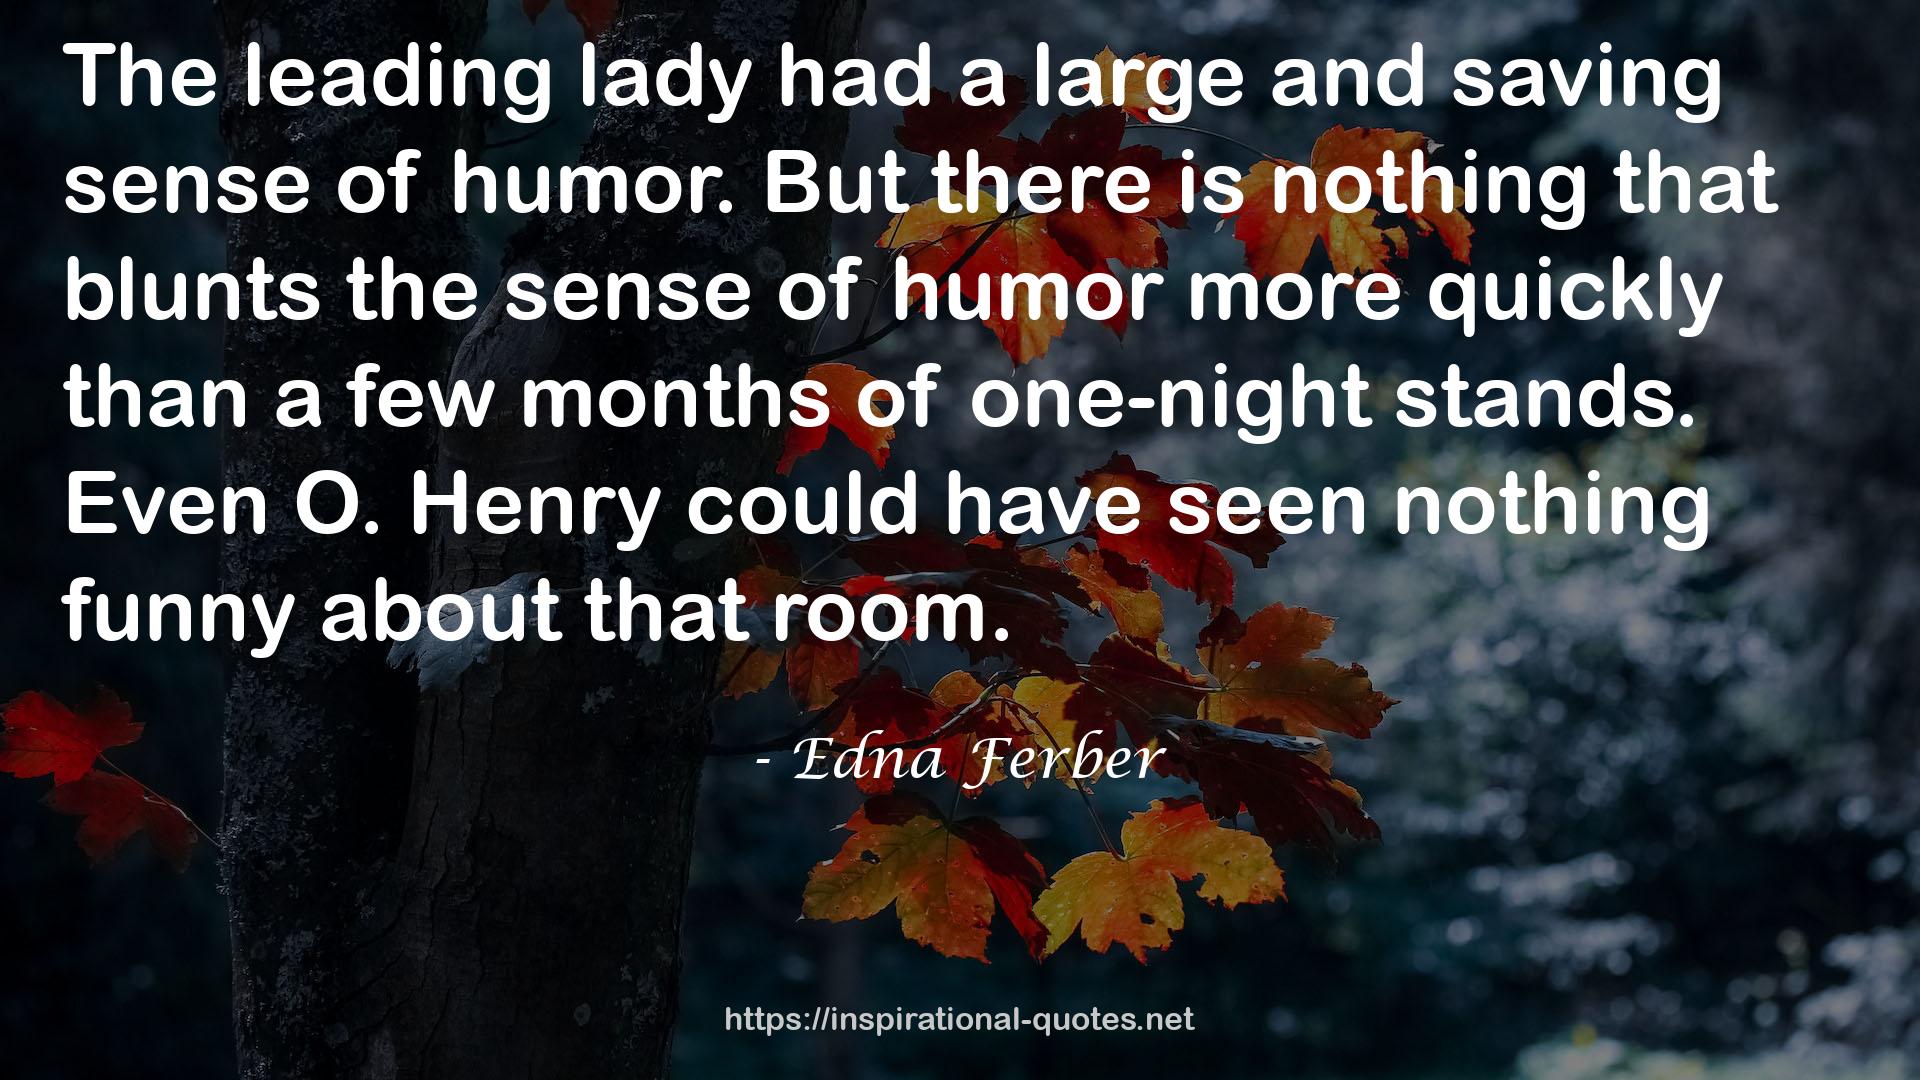 O. Henry  QUOTES